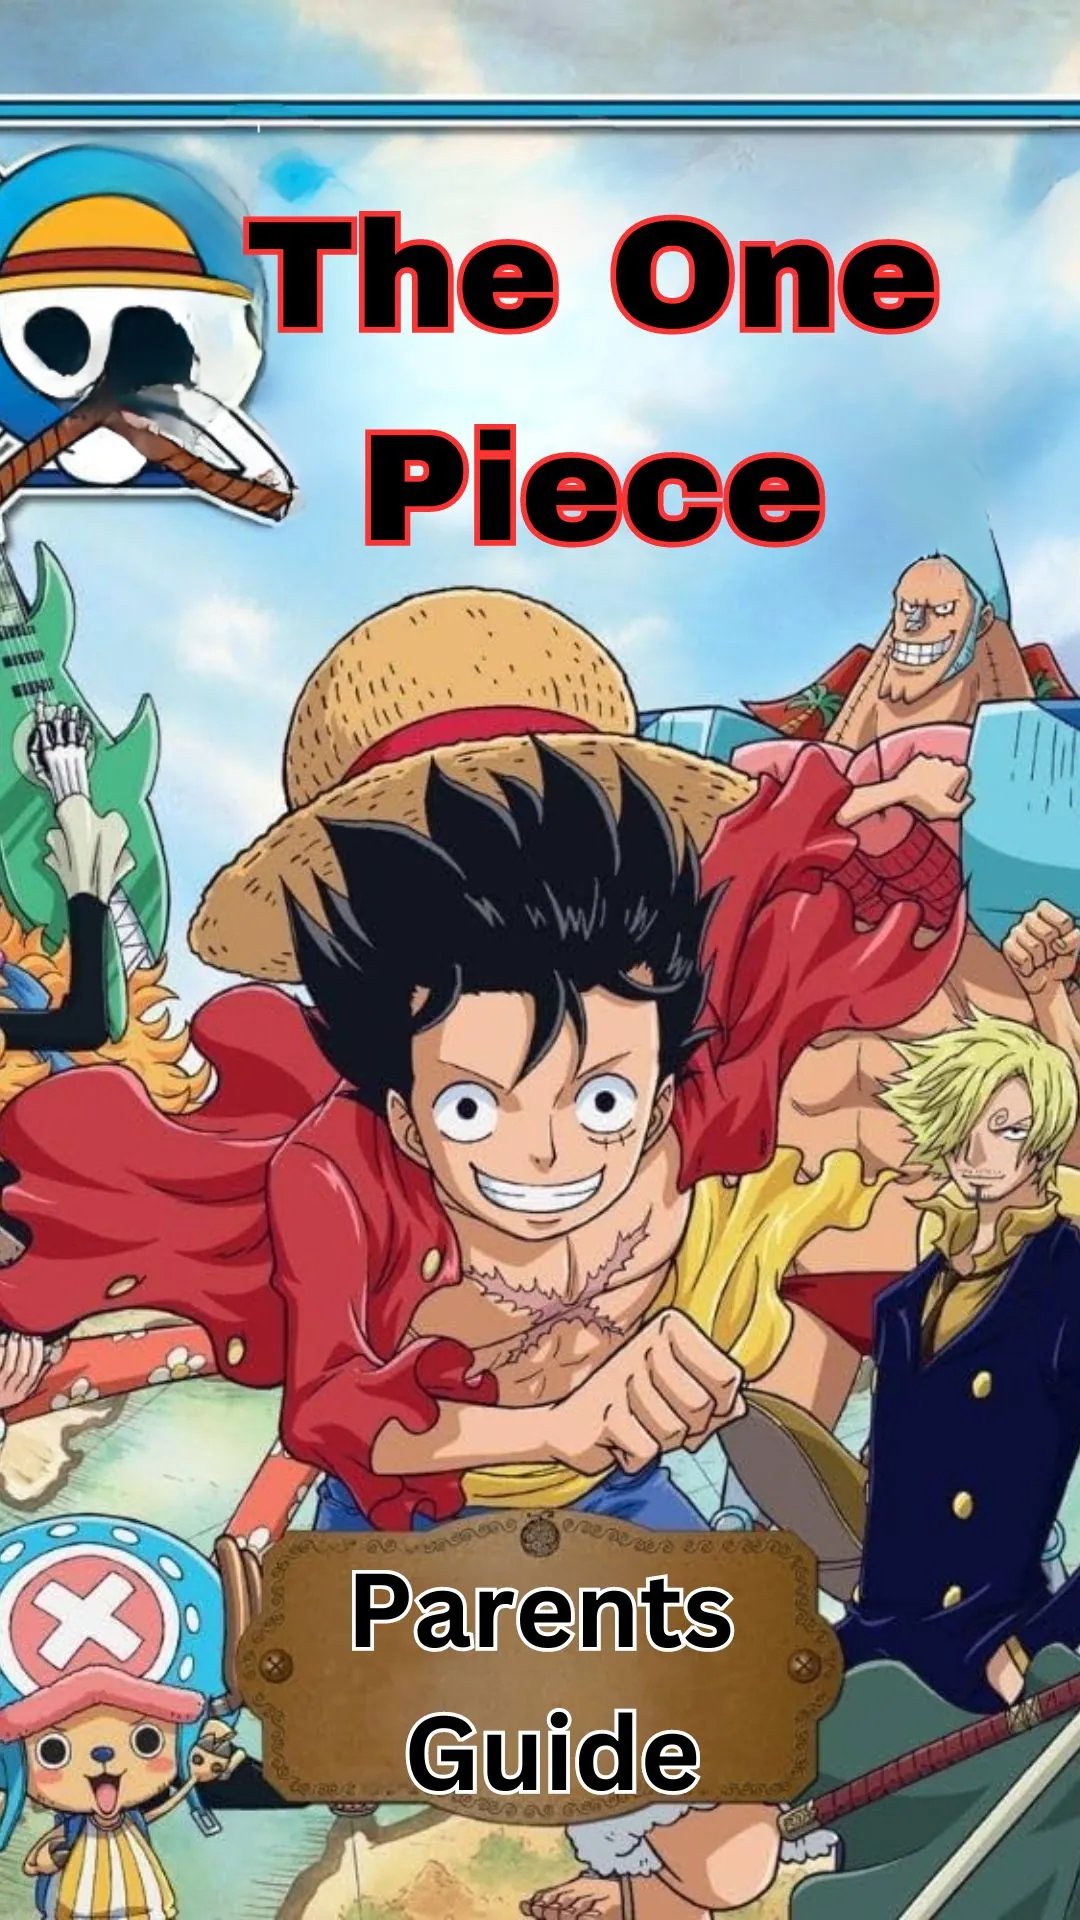 The One Piece Parents Guide (1)